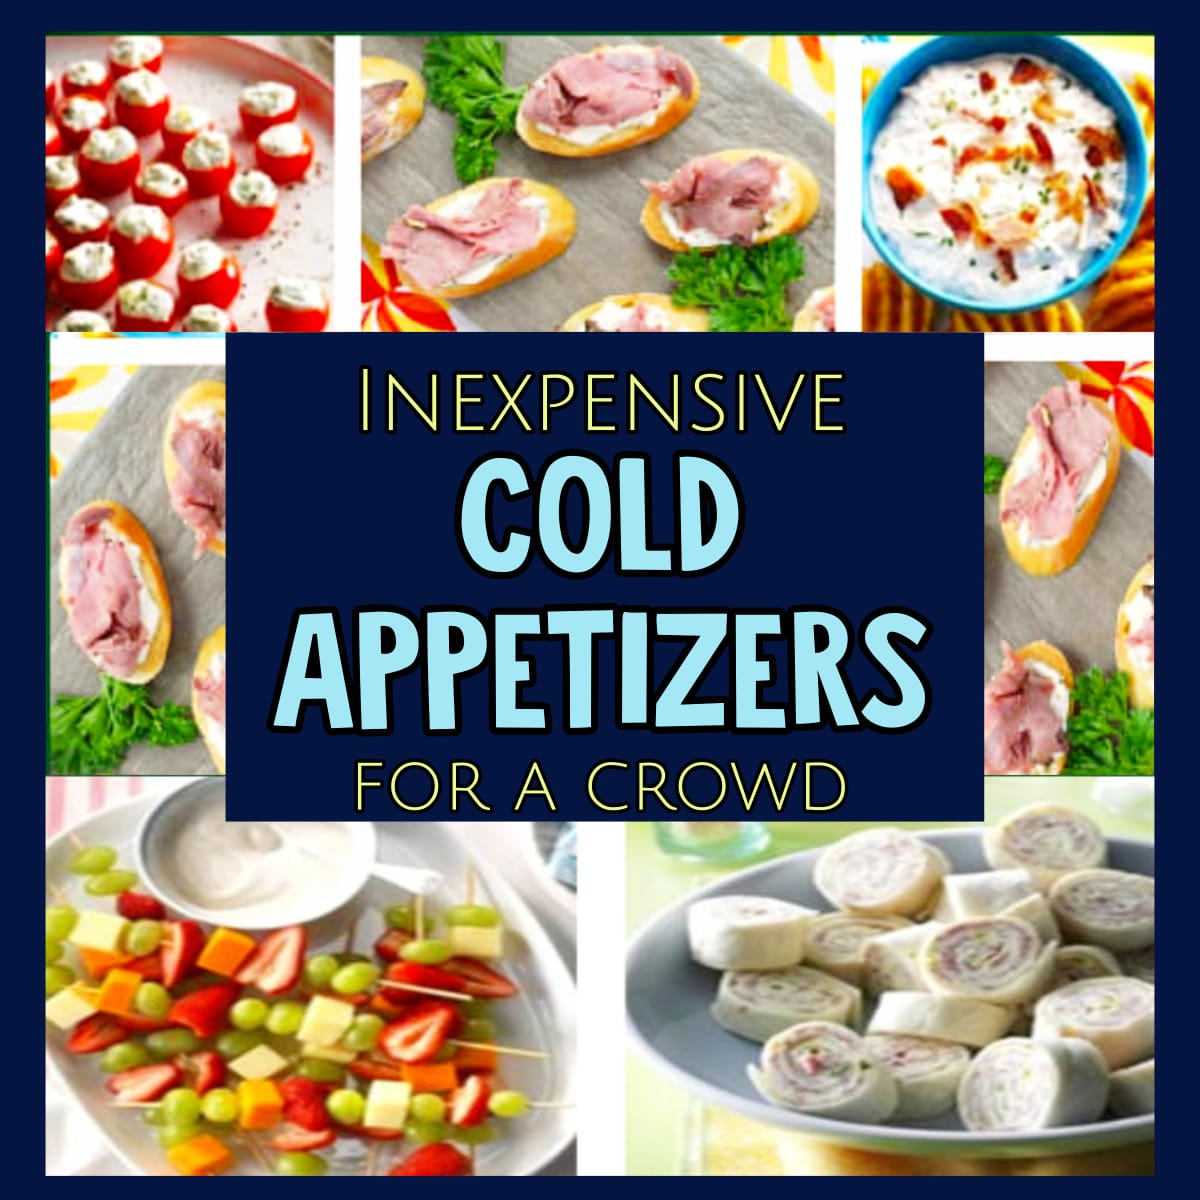 cold finger foods for a baby shower, birthday party, christmas, halloween, wedding reception, potluck at work and more easy and interesting cold finger foods for a crowd on a budget